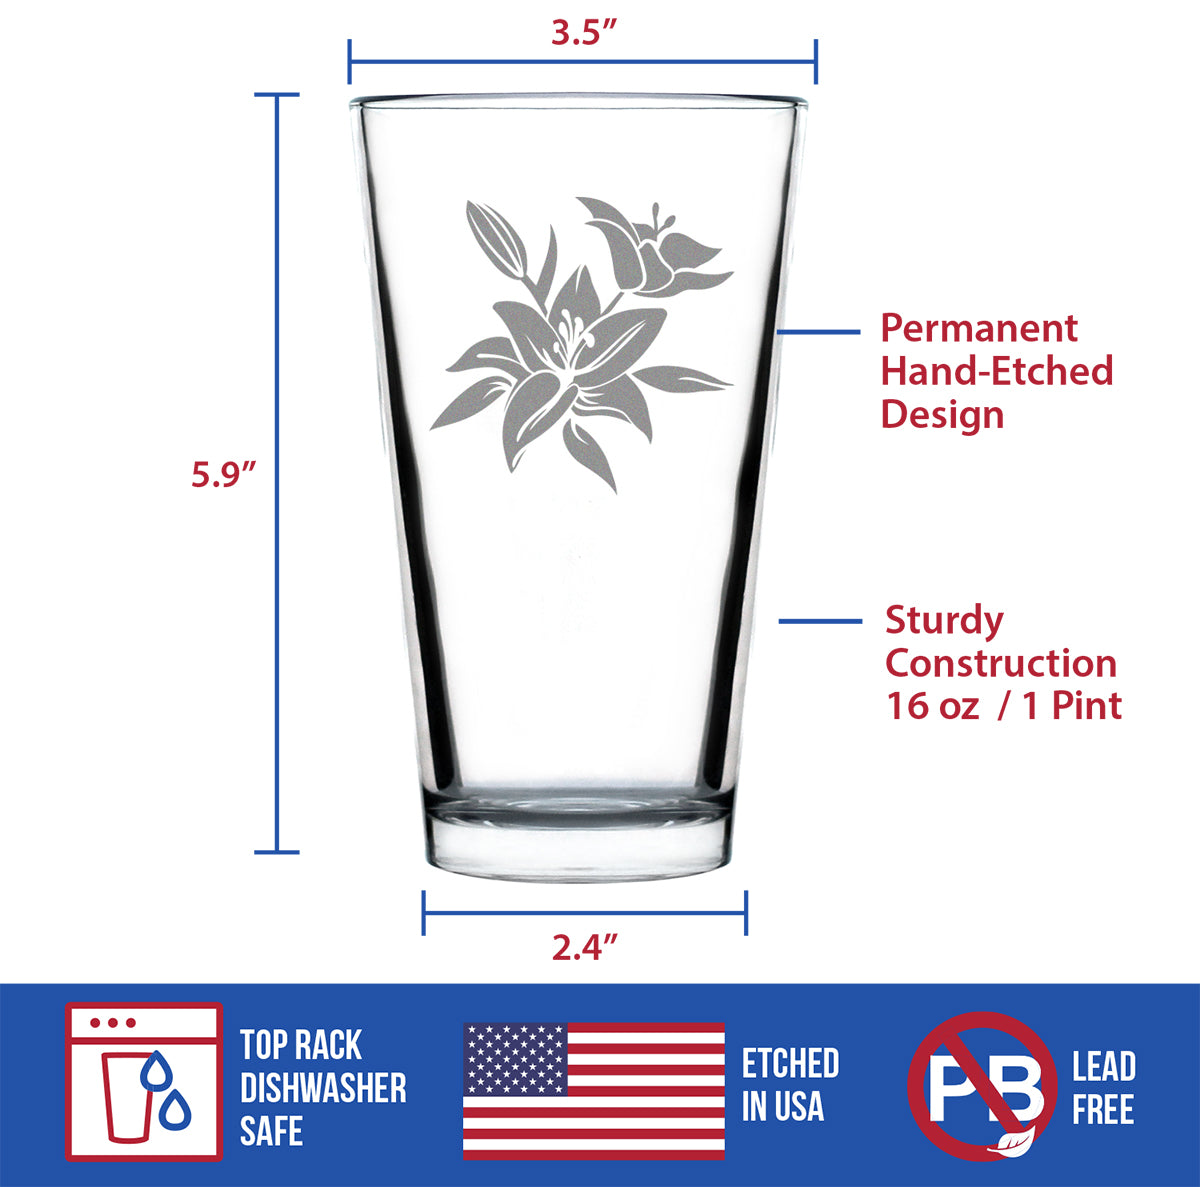 Lily Pint Glass for Beer - Floral Themed Decor and Gifts for Flower Lovers - 16 oz Glasses